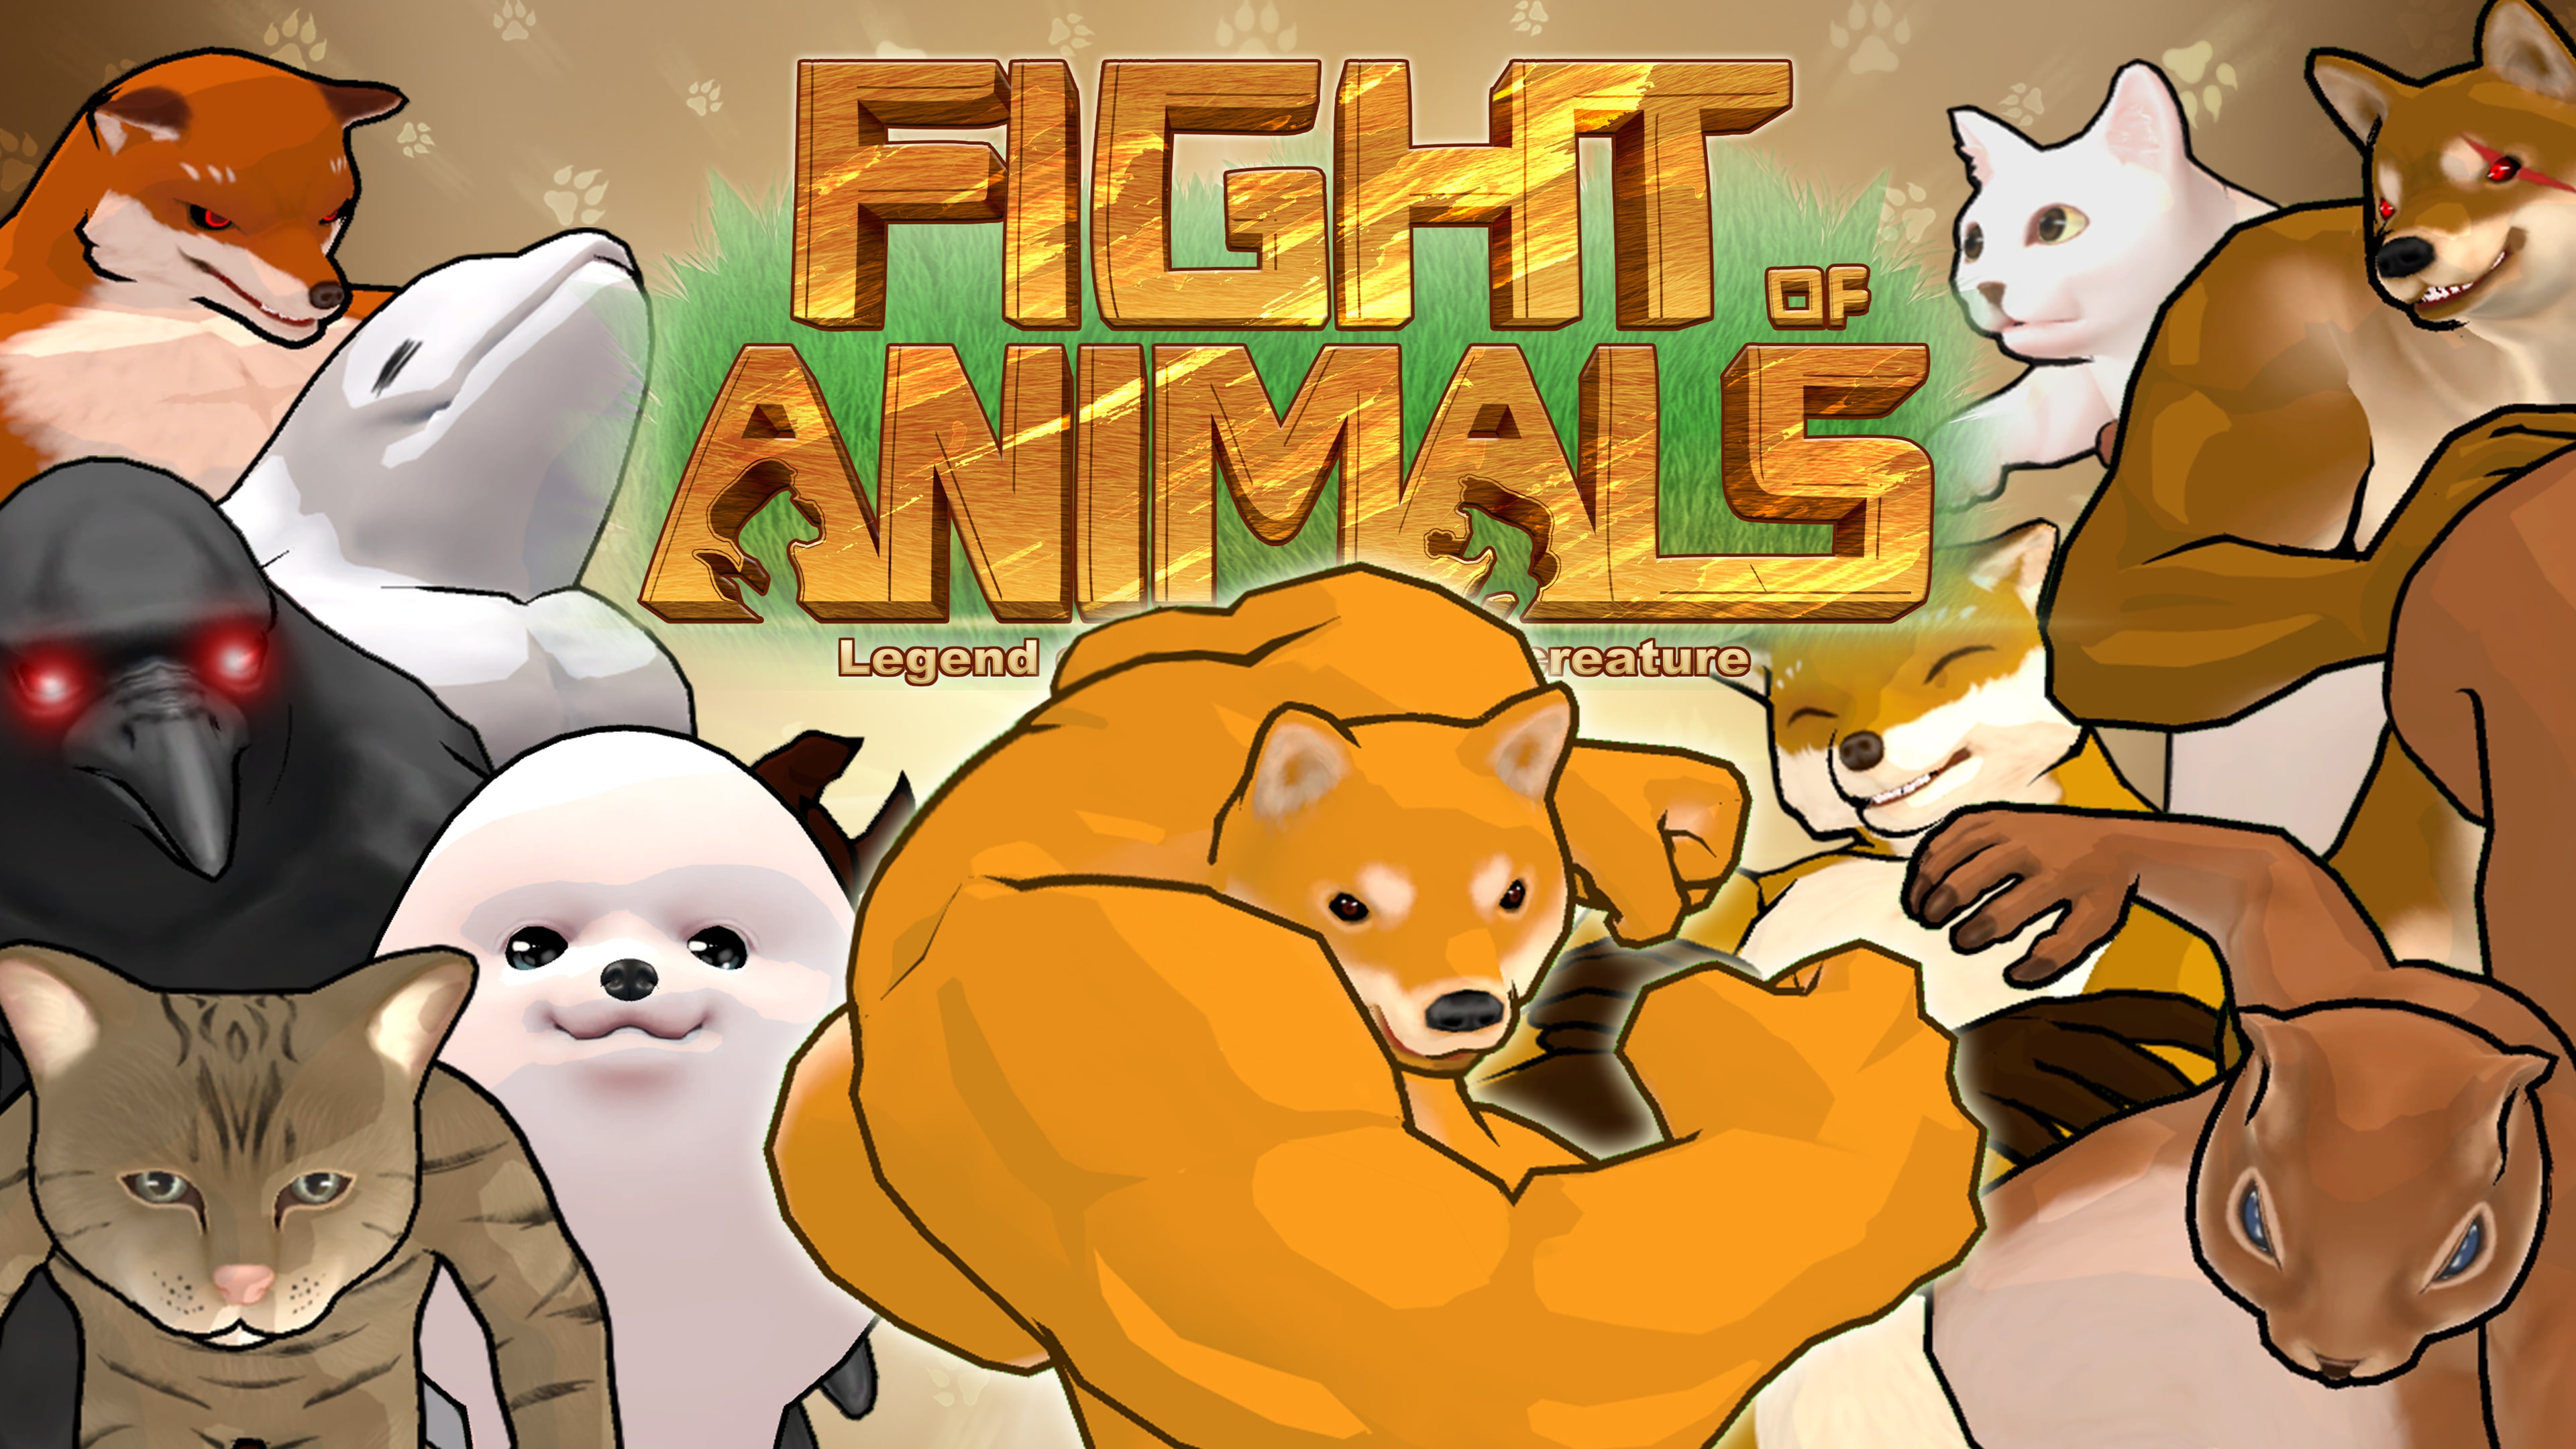 Fight of Animals (English/Chinese/Japanese Ver.)